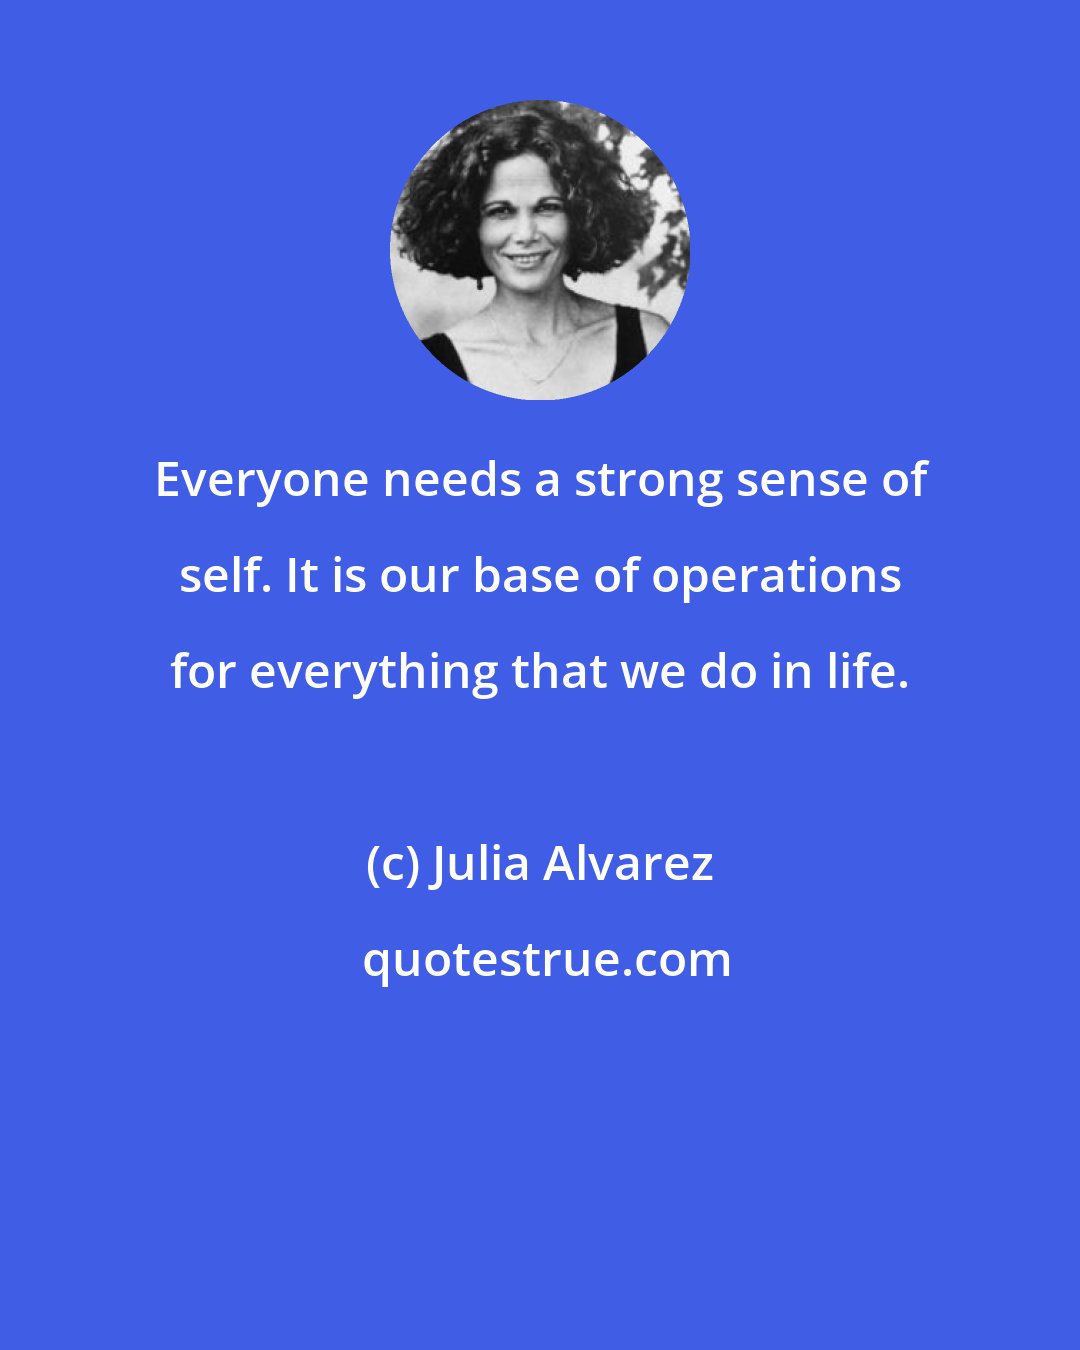 Julia Alvarez: Everyone needs a strong sense of self. It is our base of operations for everything that we do in life.